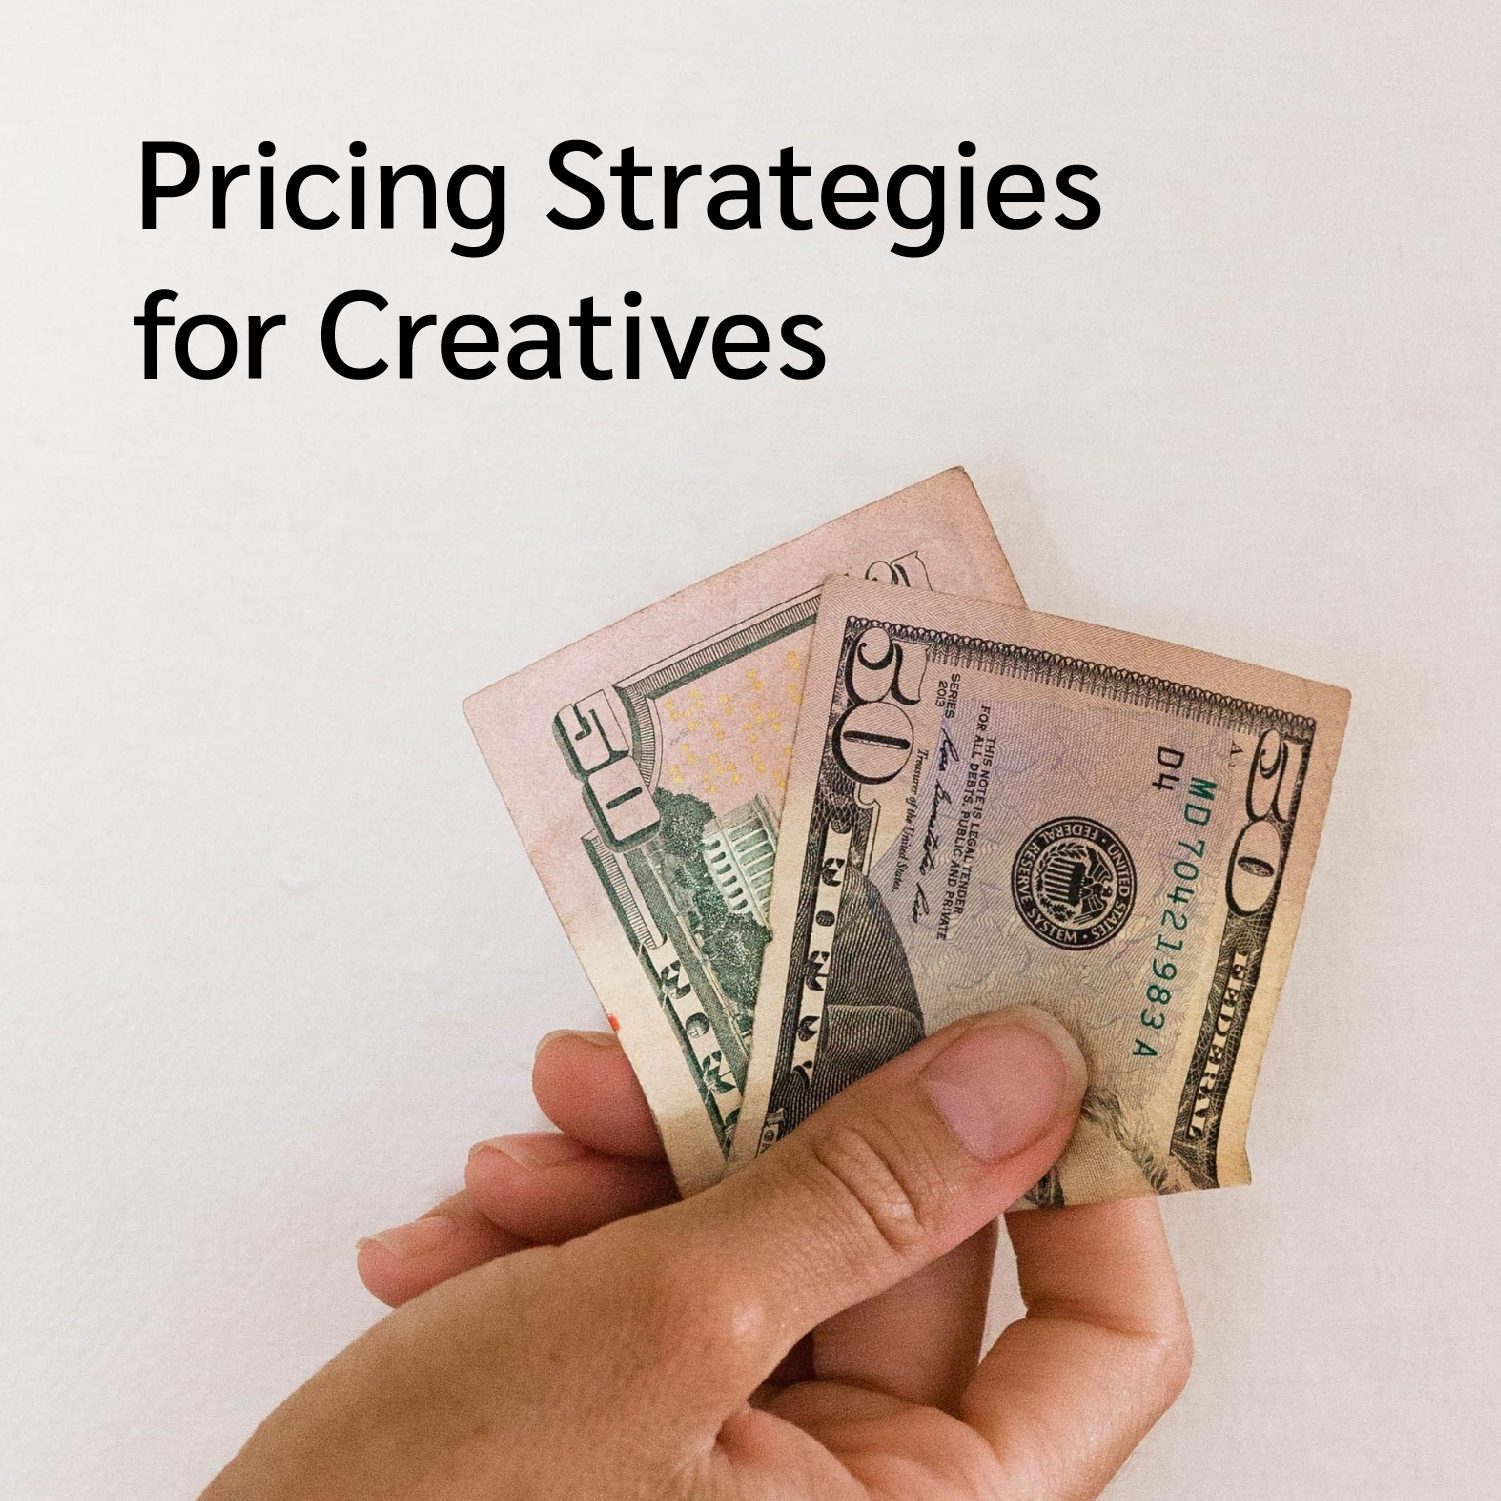 Pricing strategies for creatives